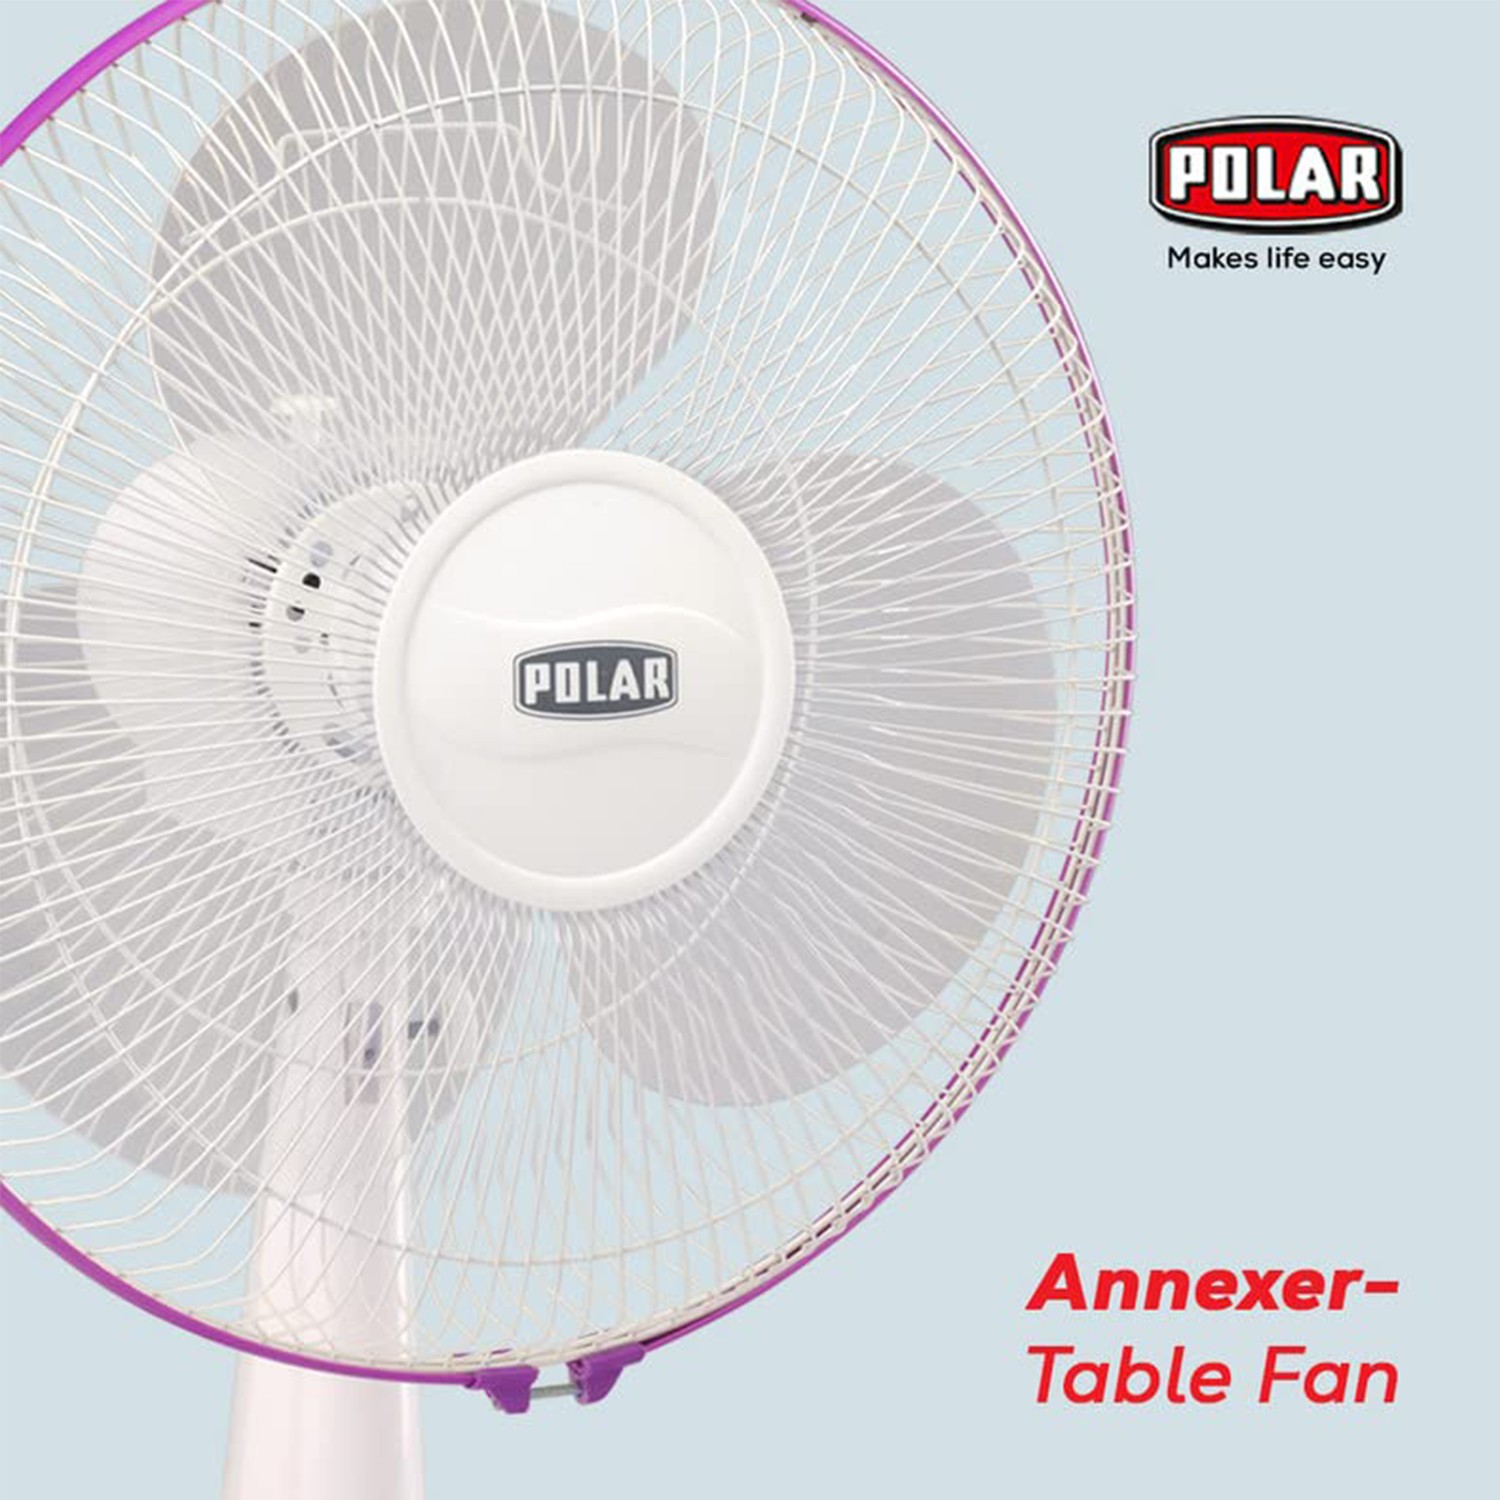 Polar POLAR Annexer High Speed 400mm Table Fan | Mini Powerful Desktop Cooling Fan with 3 Speeds 90° Adjustable Small Personal Cooling Fan(White Mauve)